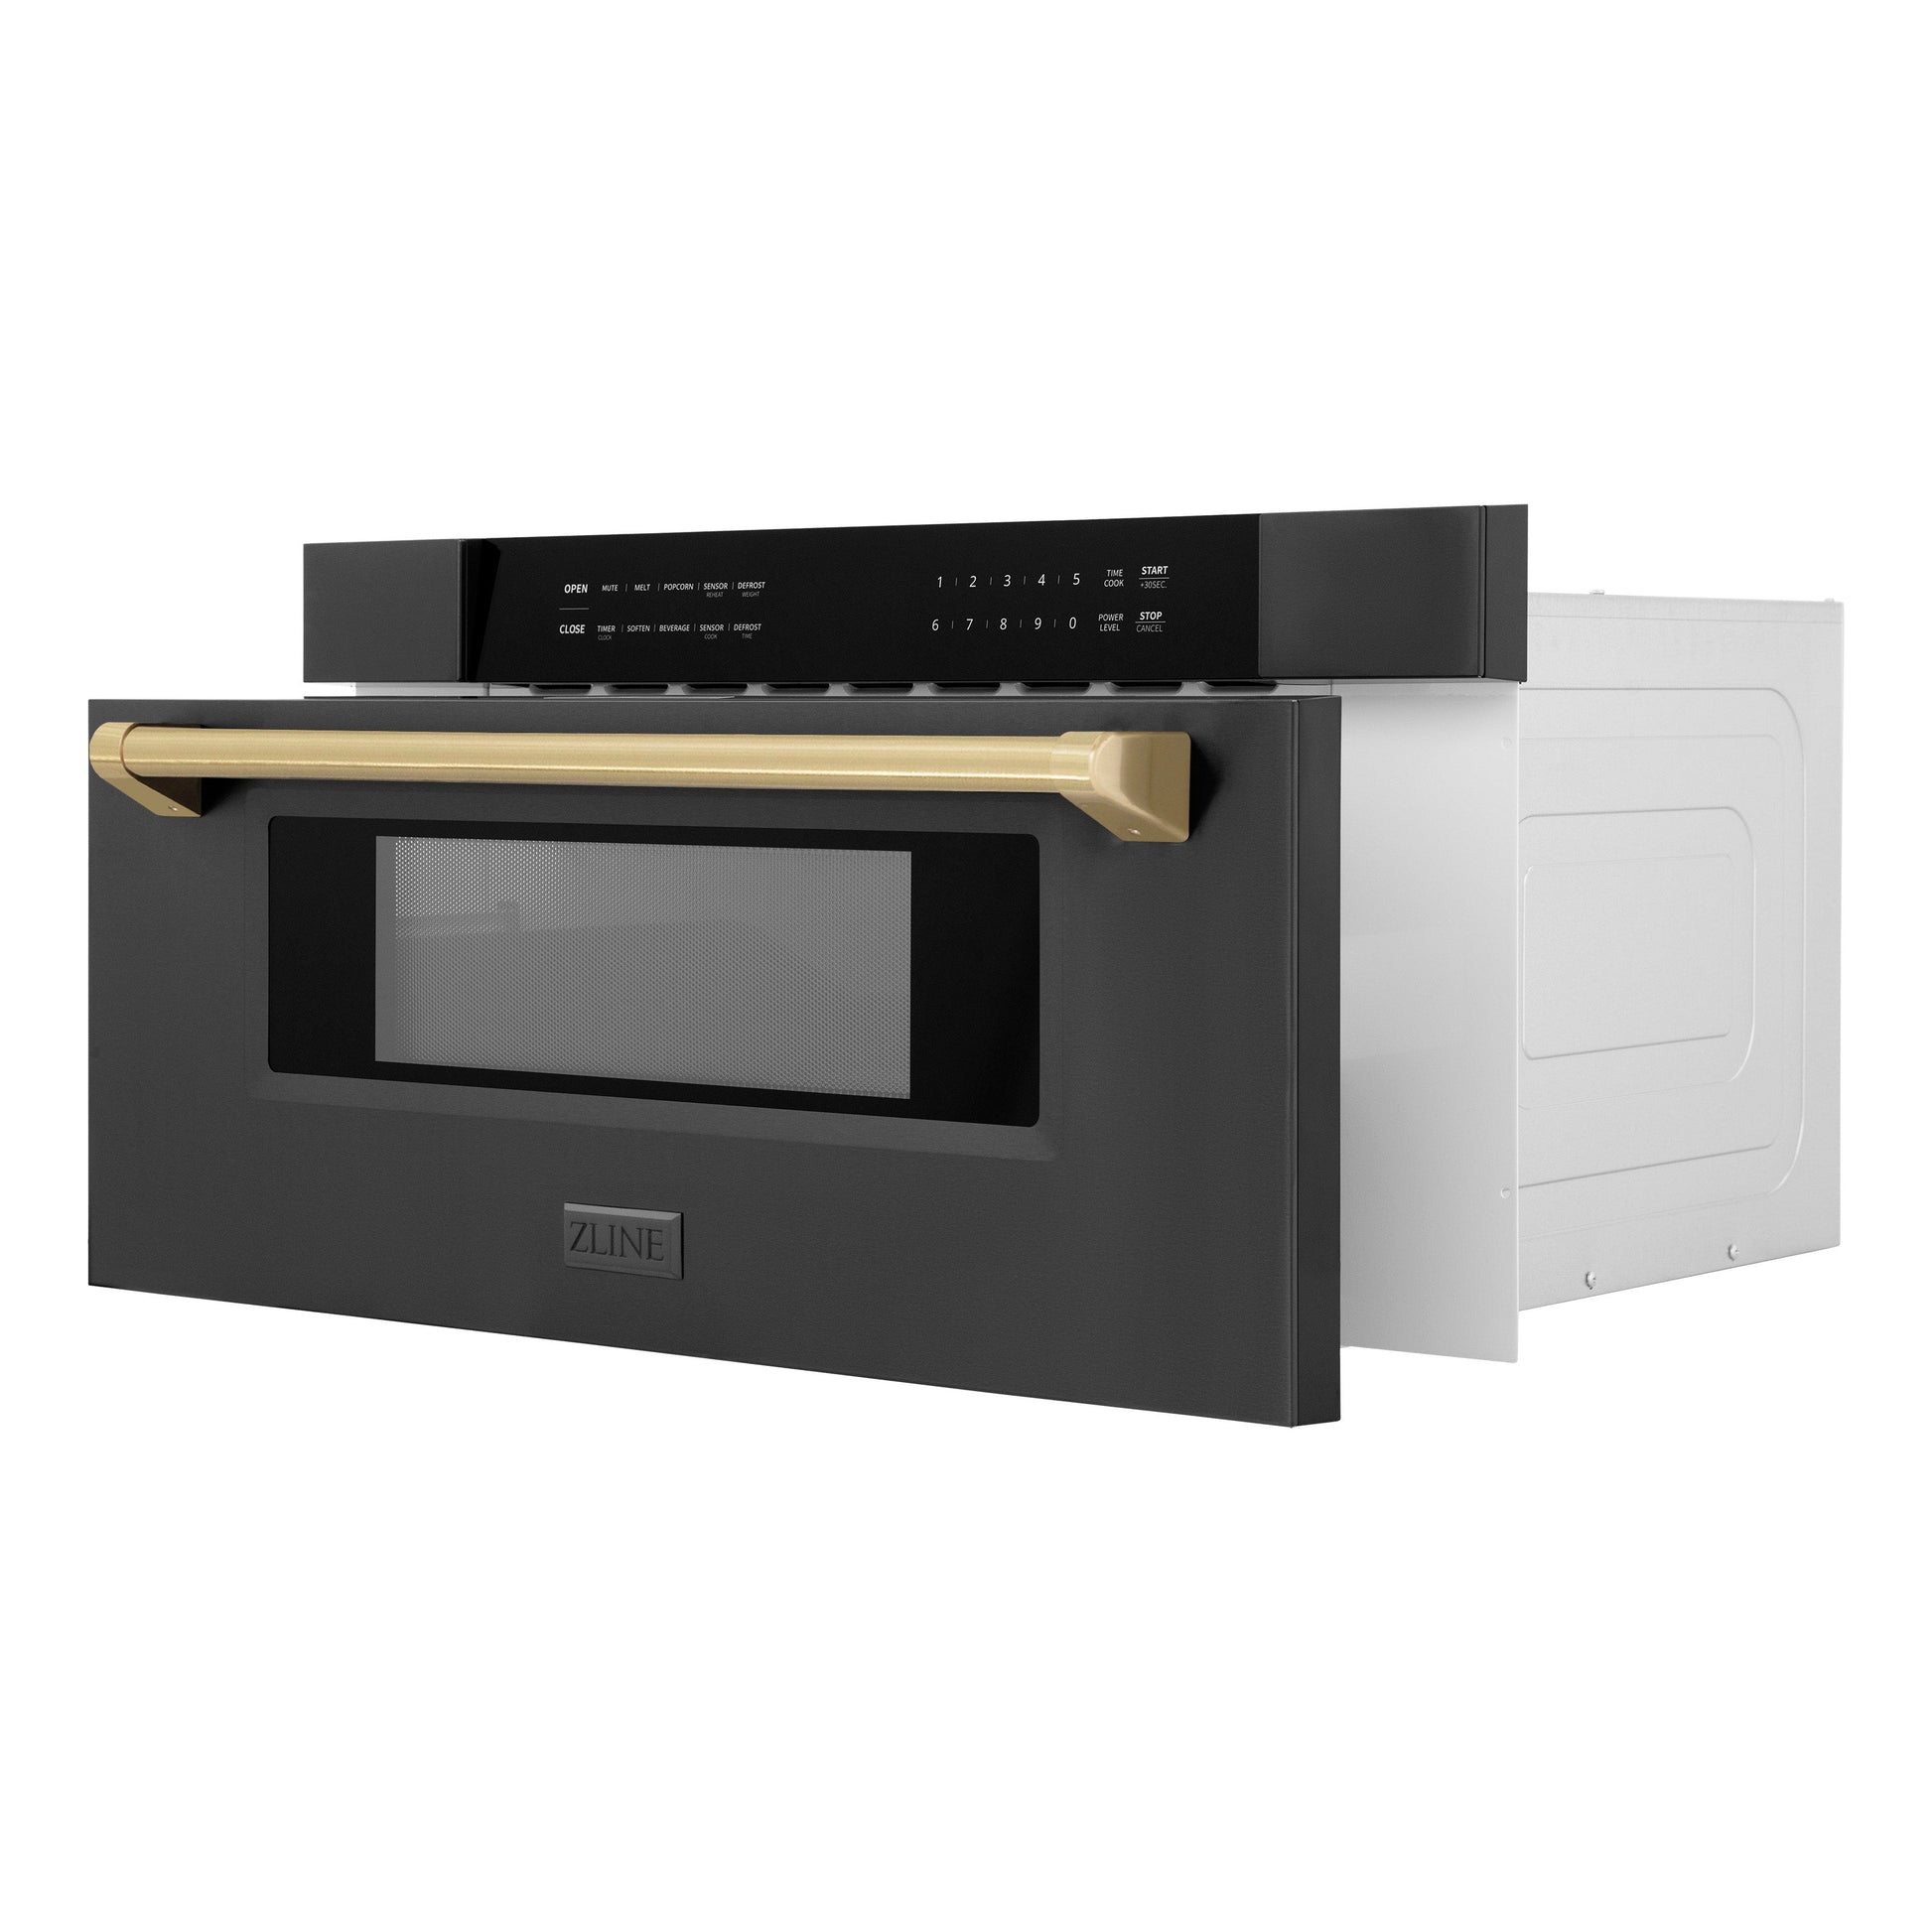 ZLINE Autograph Edition 30" Built-in Microwave Drawer - Black Stainless Steel with Accents